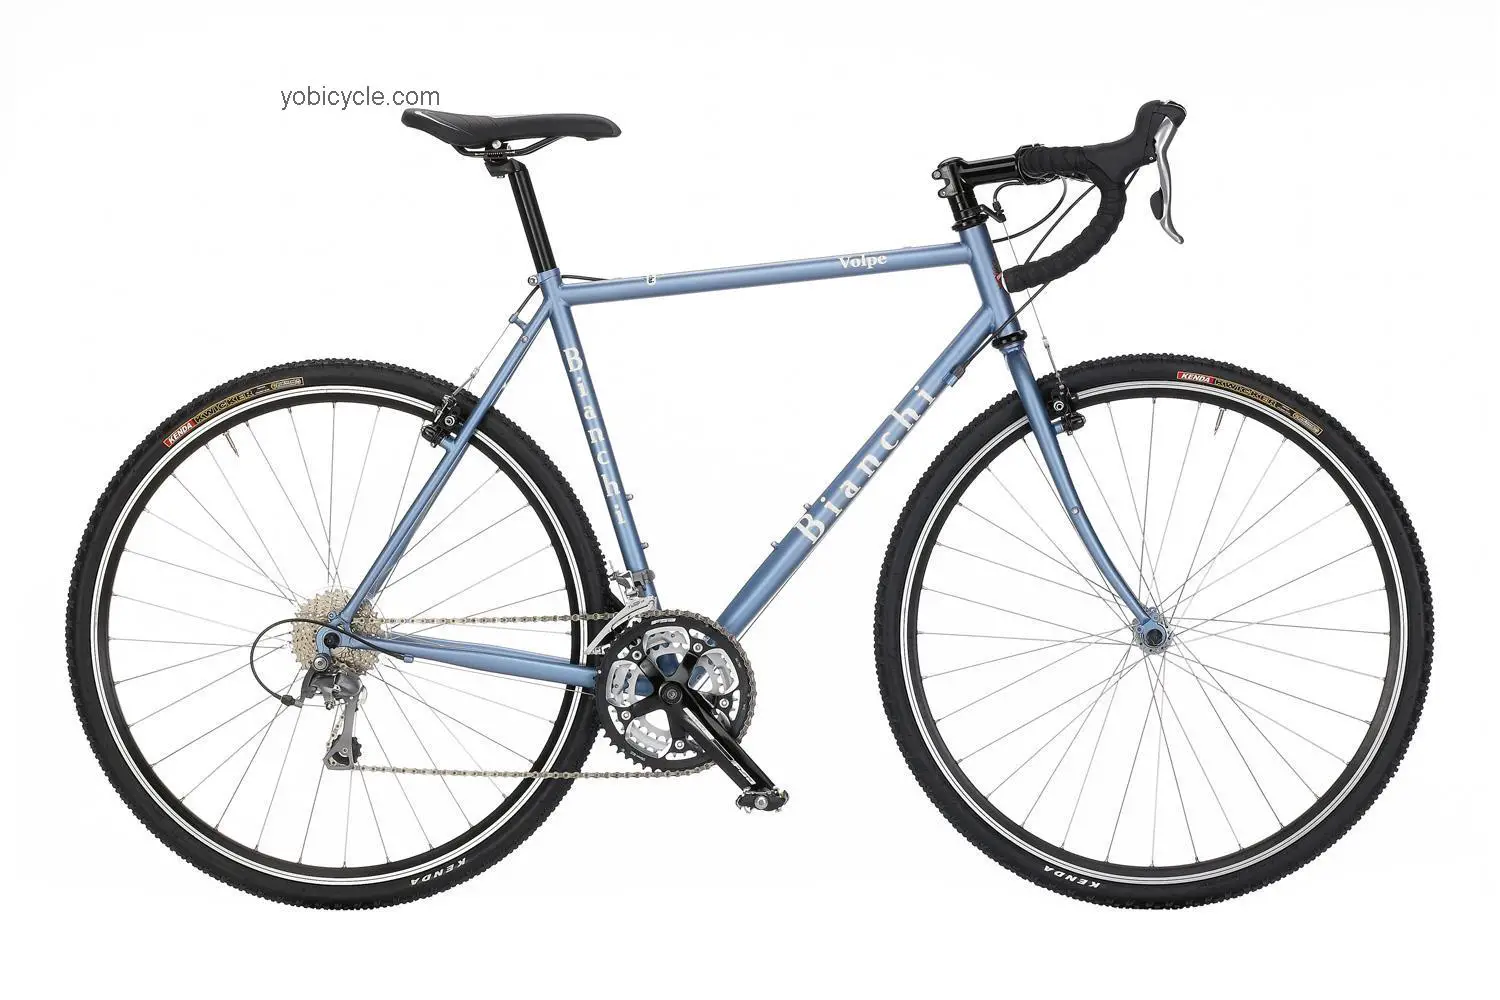 Bianchi Volpe 2013 comparison online with competitors